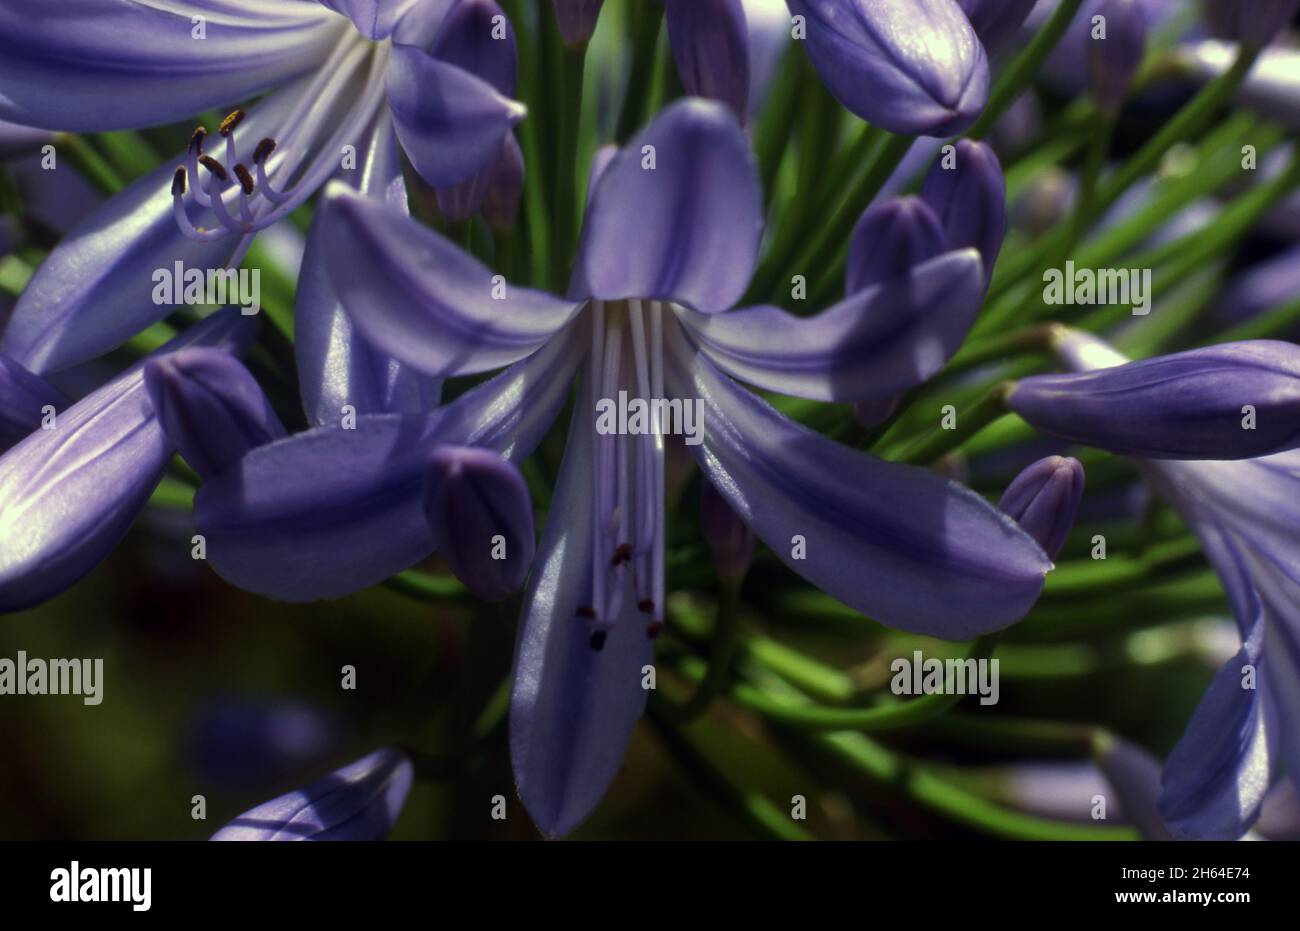 CLOSE-UP OF AN AGAPANTHUS FLOWER IN FULL BLOOM Stock Photo